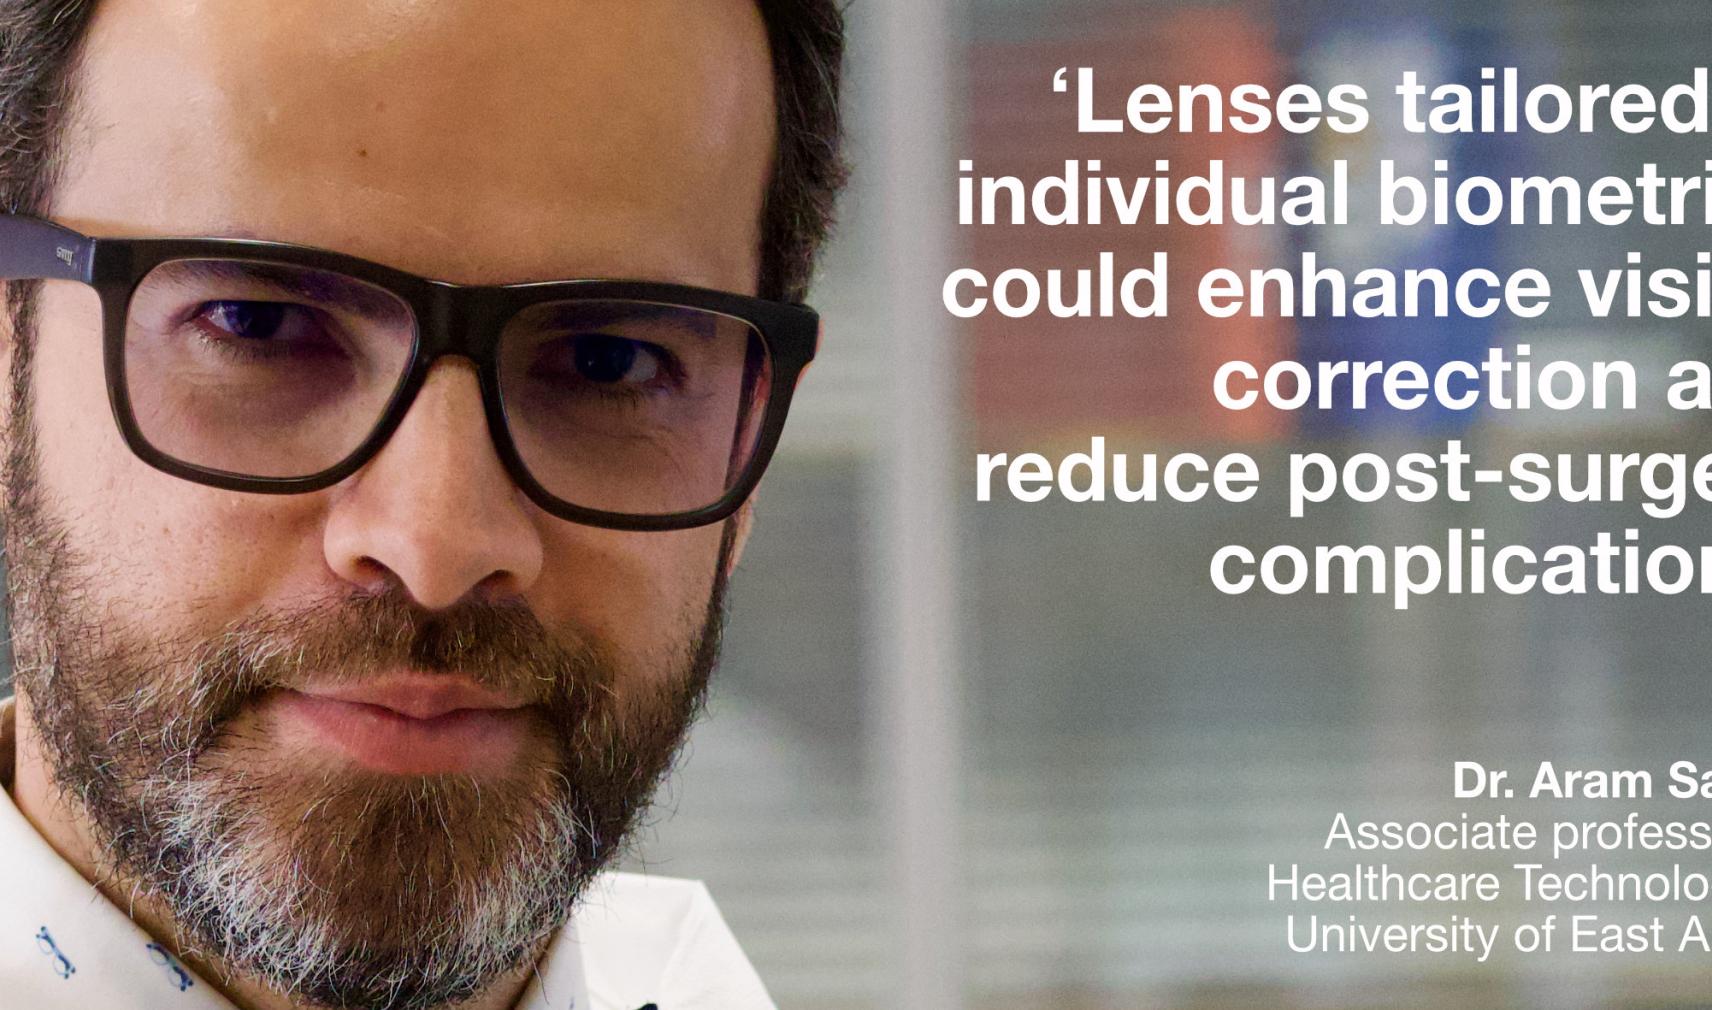 Dr. Aram Saeed, associate professor of healthcare technologies at the University of East Anglia, is part of a team that developed a resin material that can be 3D-printed to form customised intraocular lenses